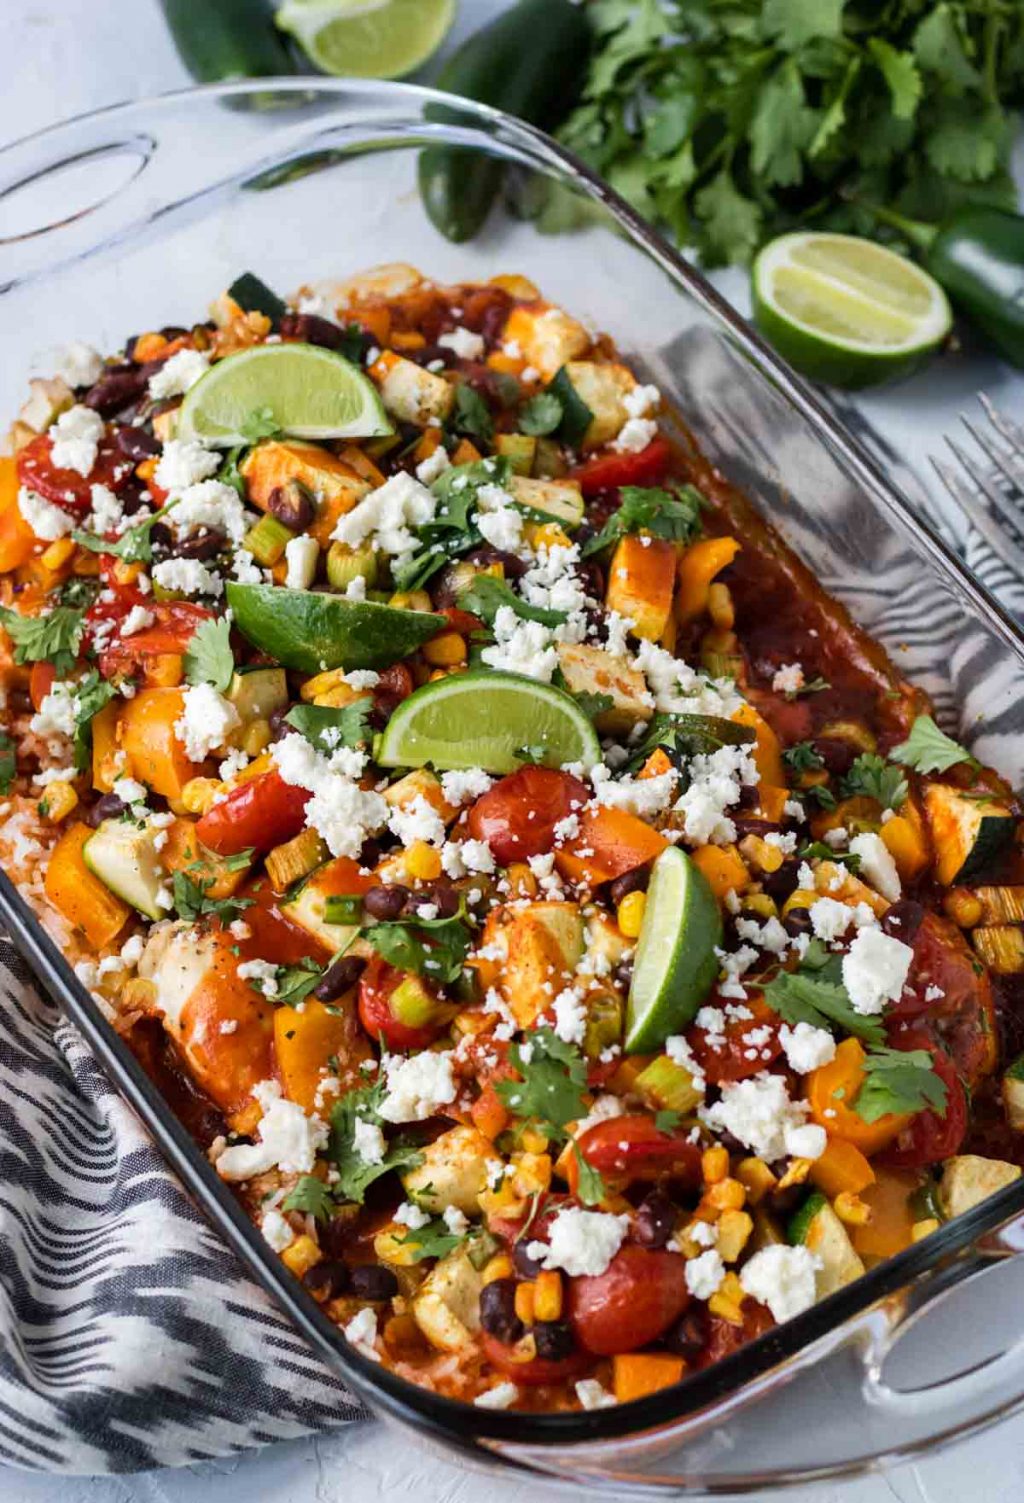 Healthy Mexican Casserole in a glass baking dish topped with queso fresco and limes